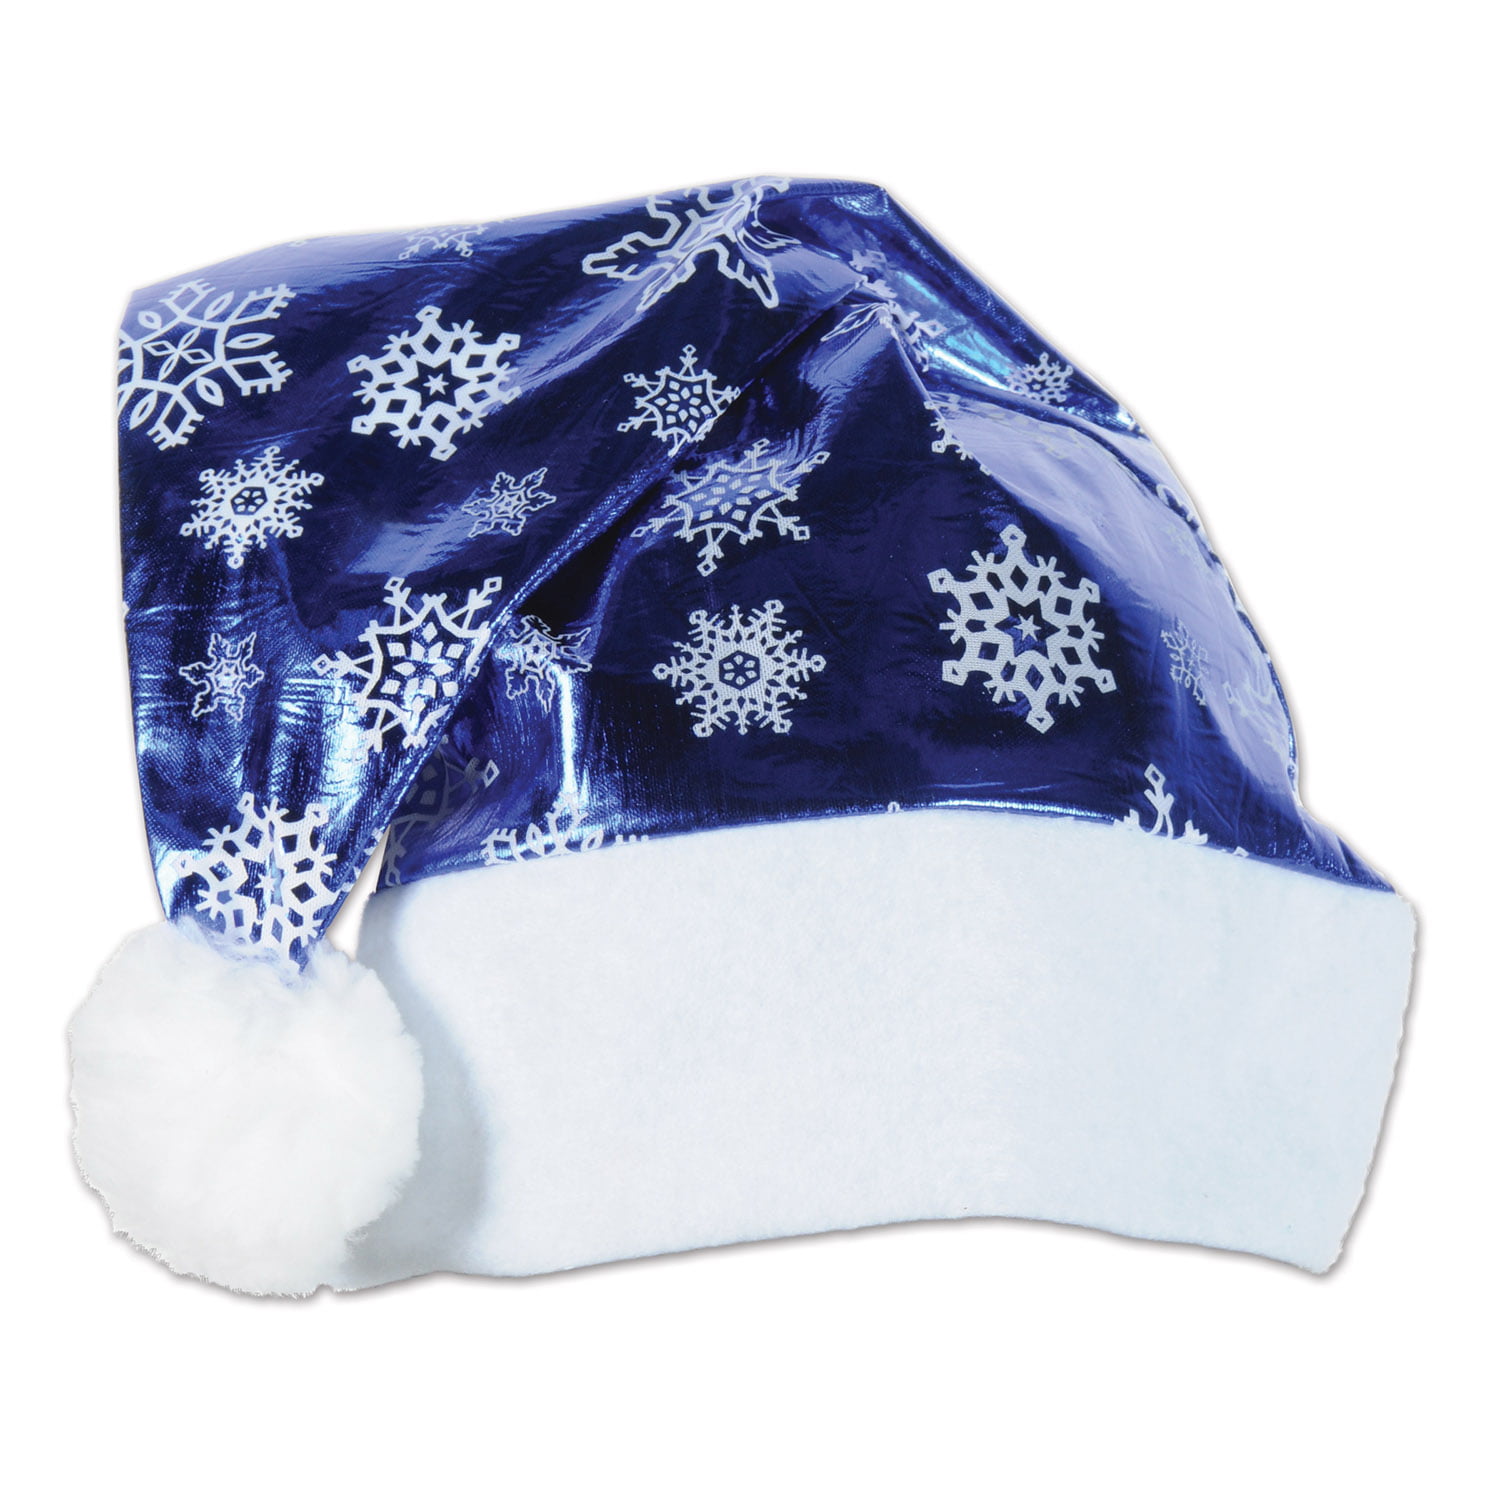 Christmas Santa Hat Blue And White Cap For Santa Claus Costume Decorations Hot 